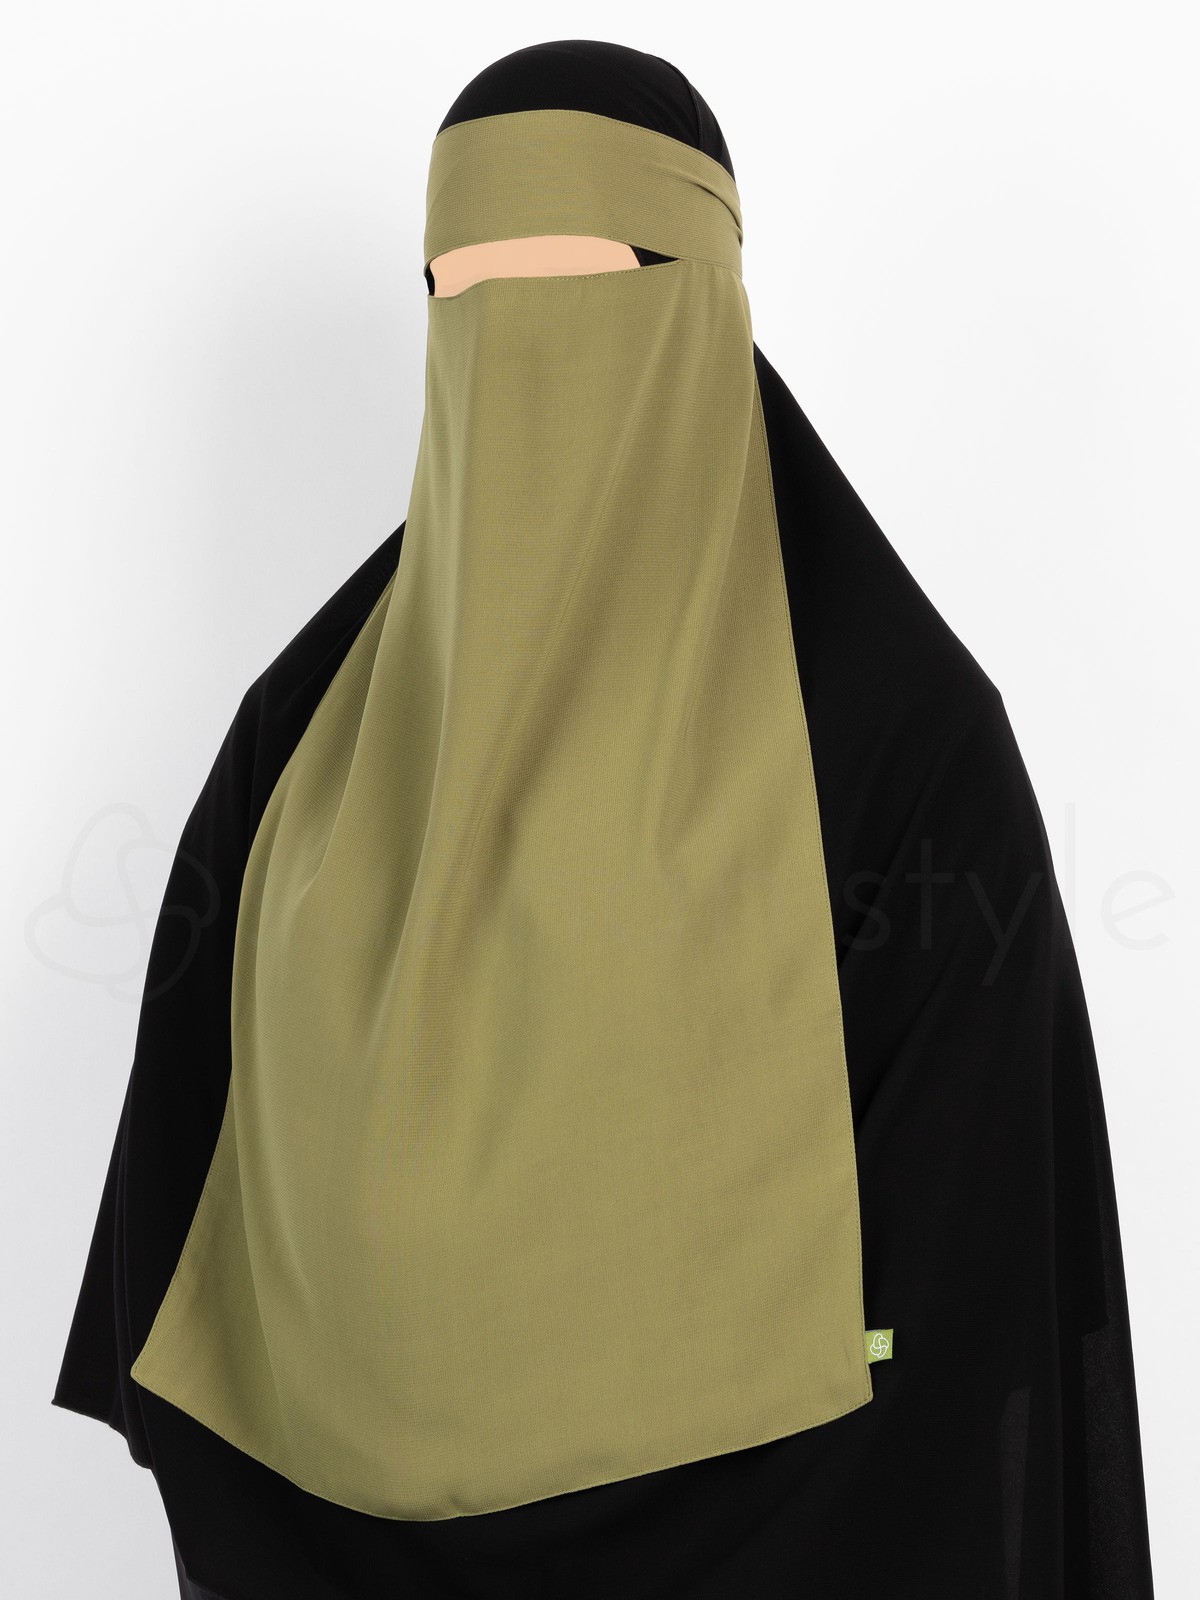 Sunnah Style - Long One Layer Niqab (Moss)